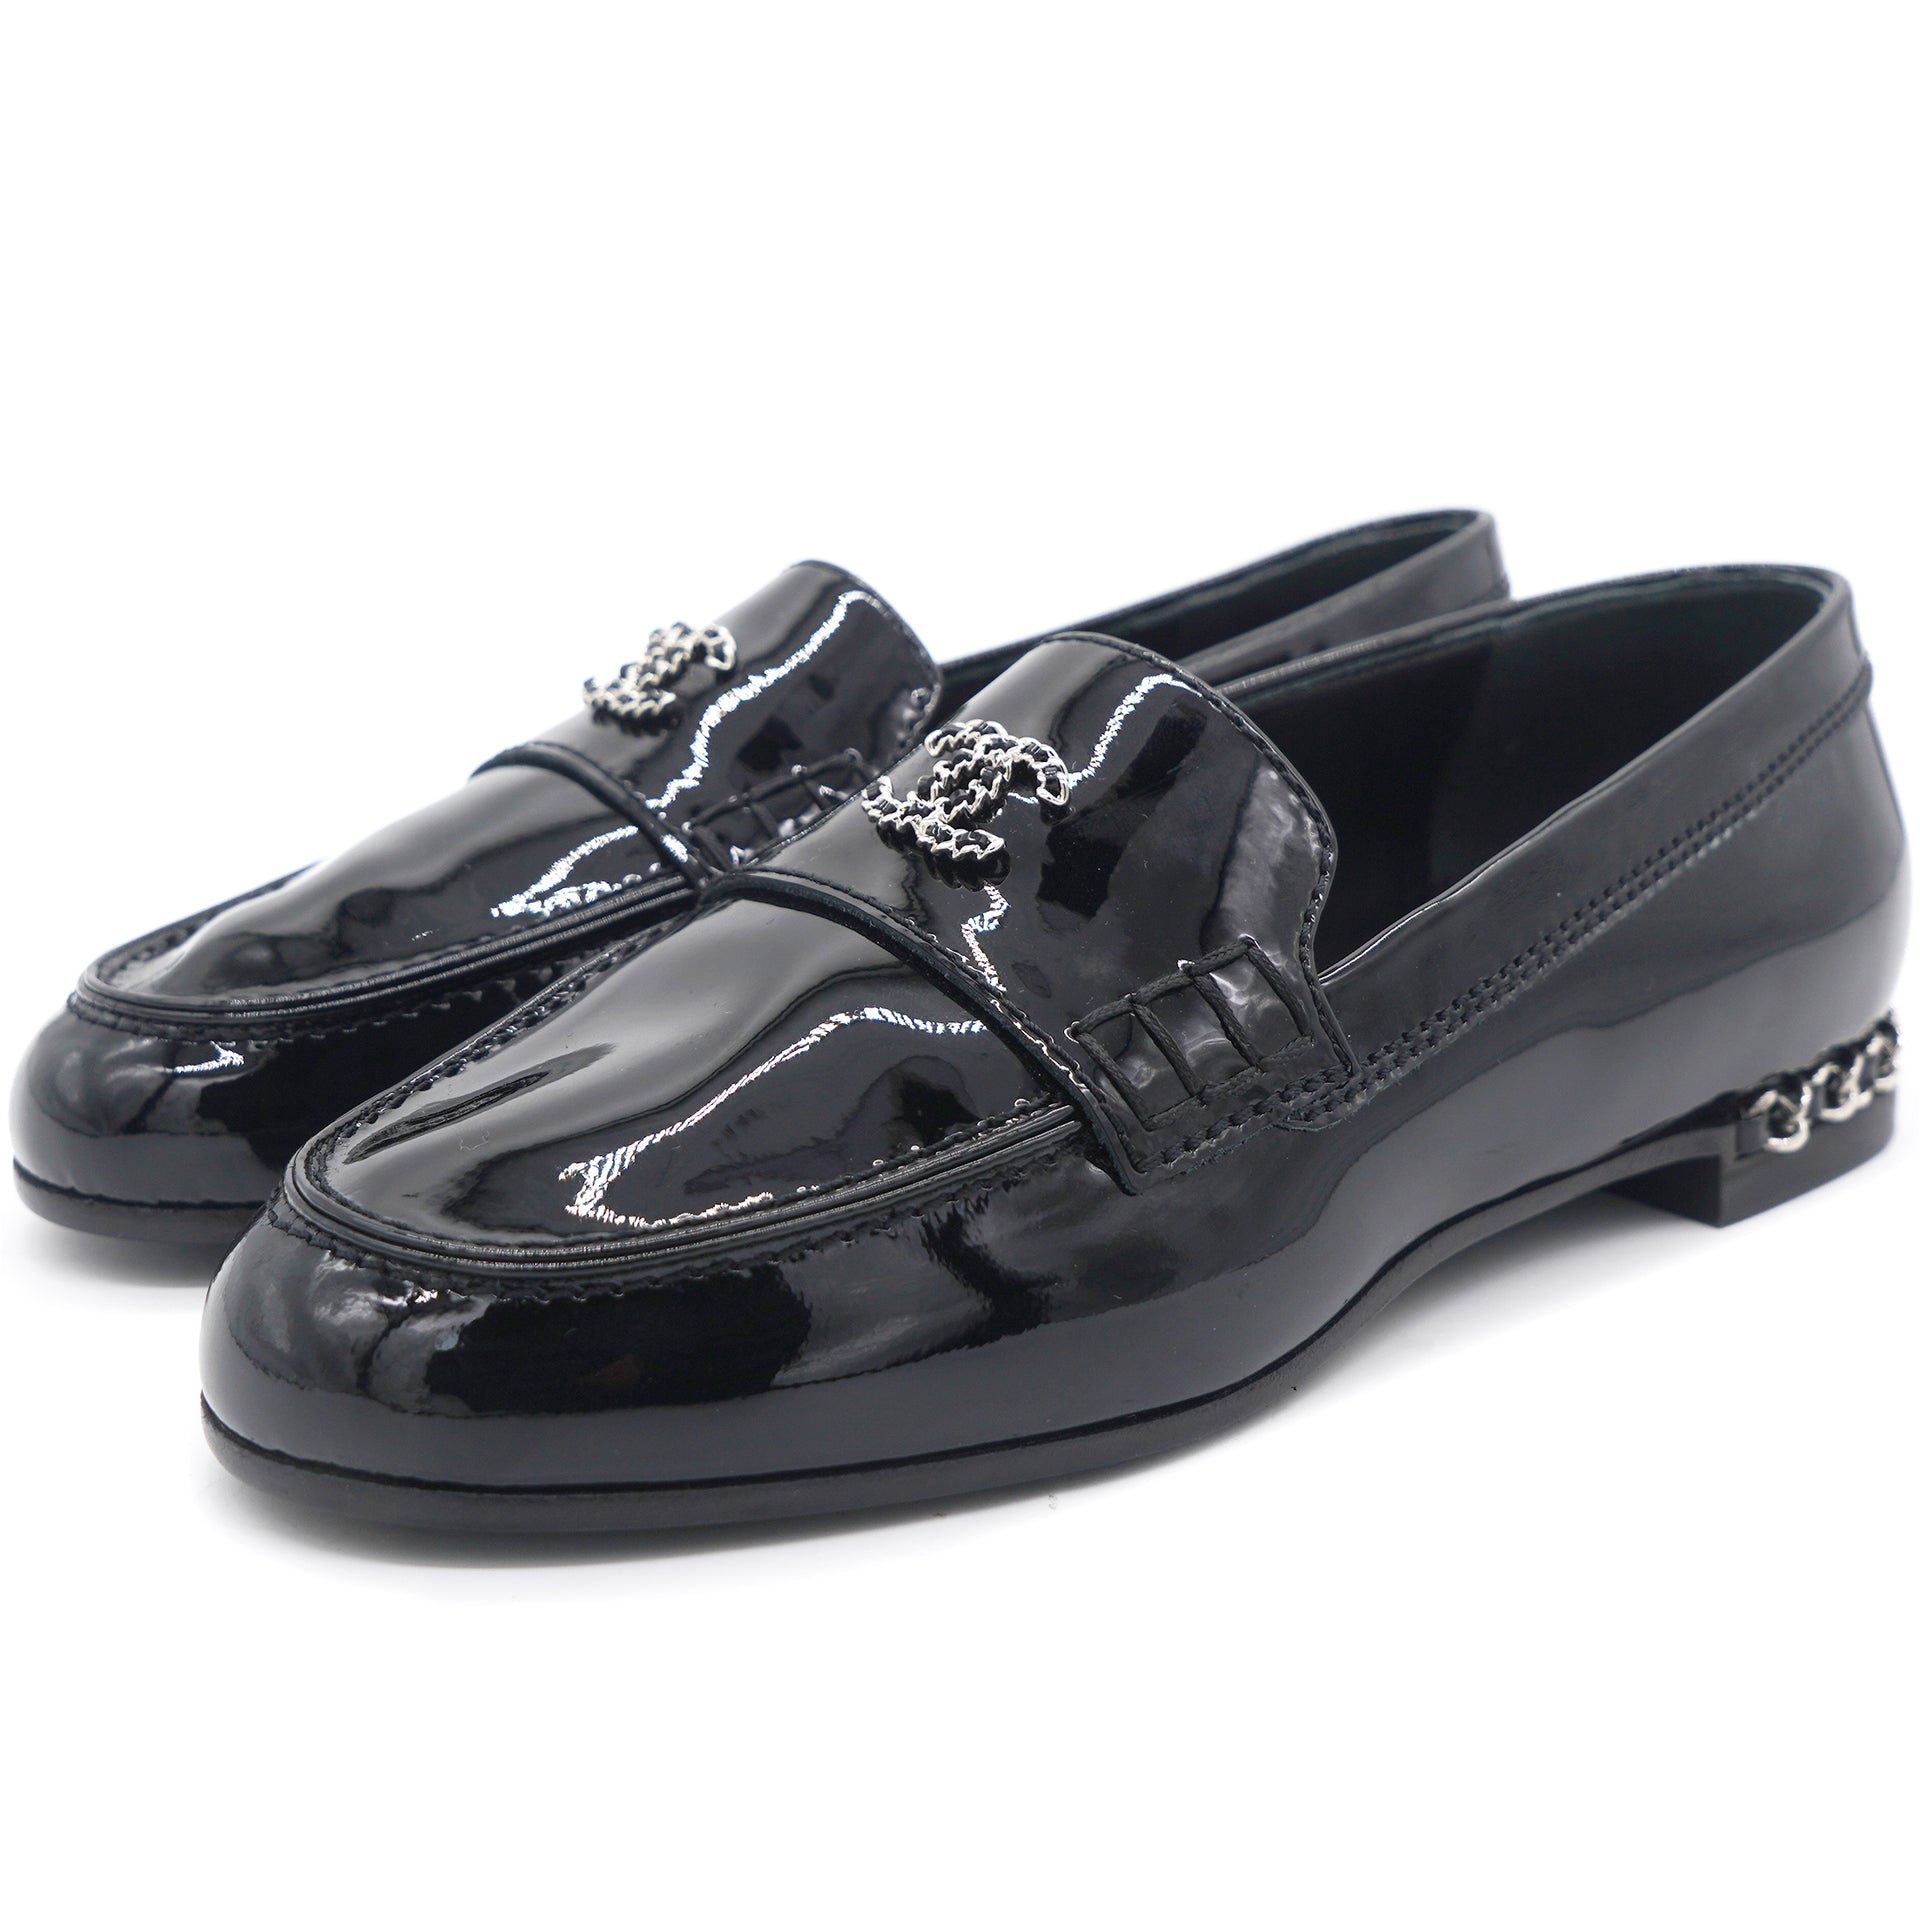 Chanel size35 Loafer Patent leather black LGHW